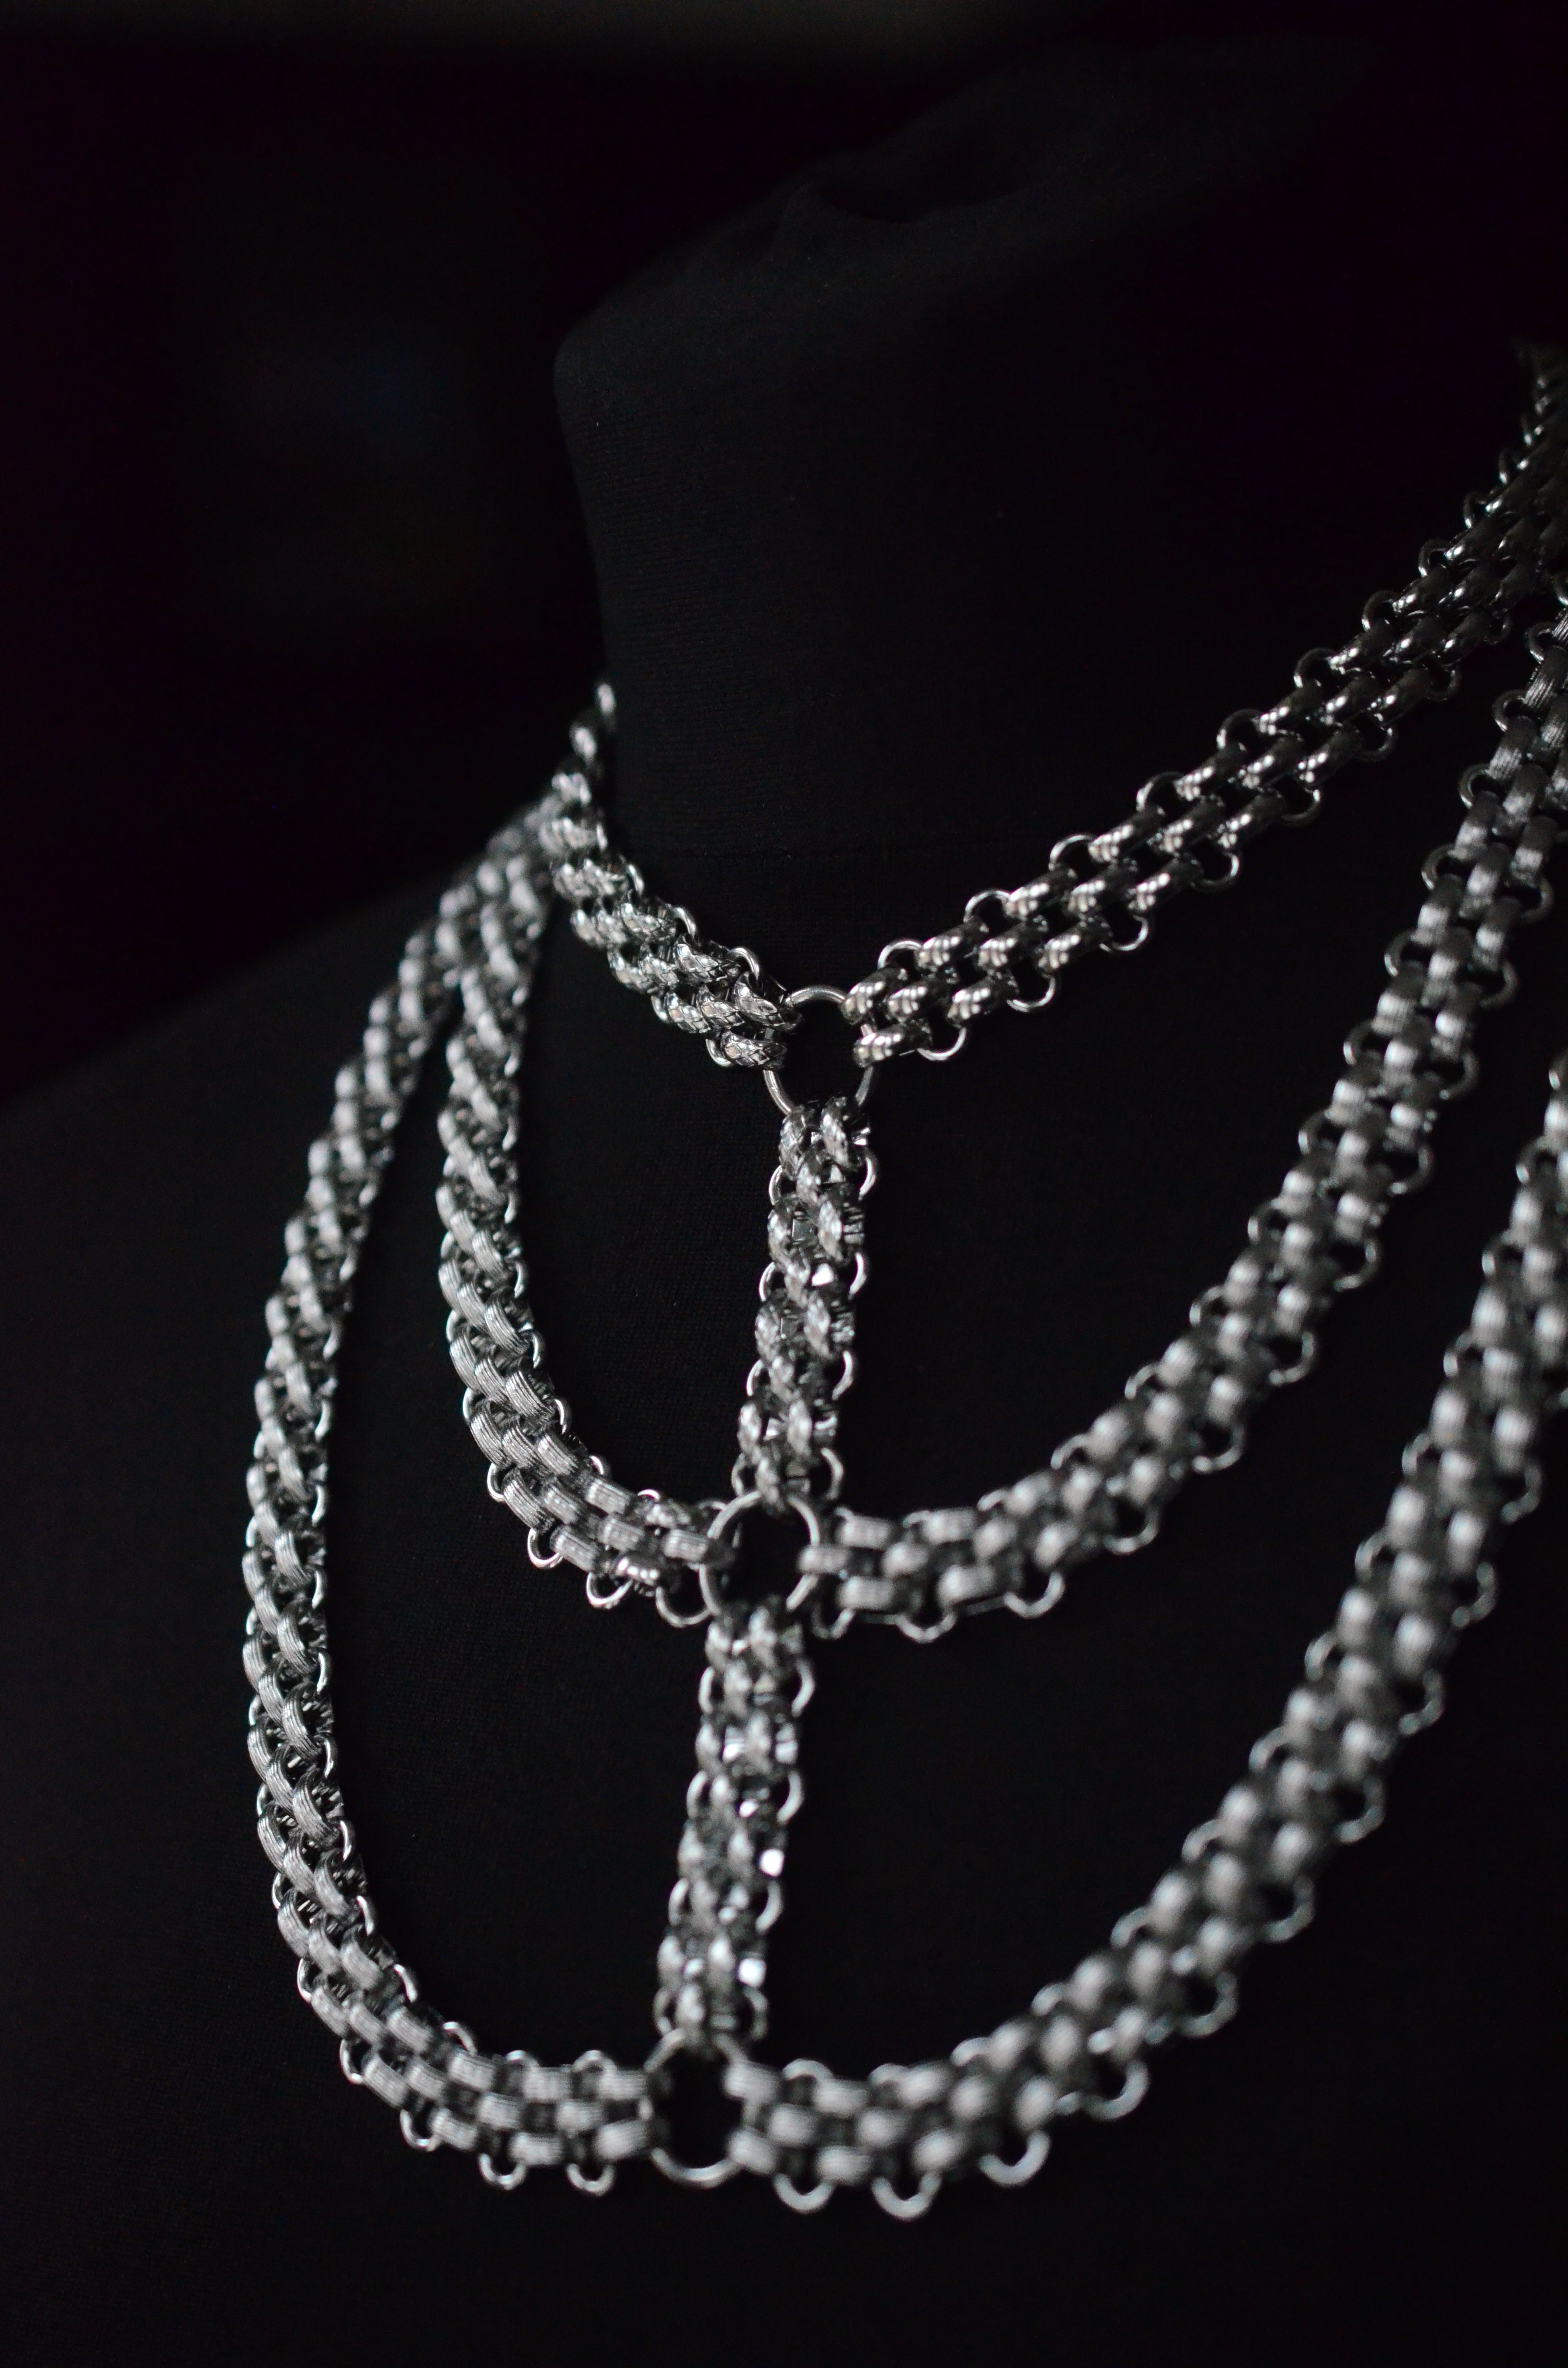 All the Chains - Stainless Steel Jewellery and body Jewellery Collection